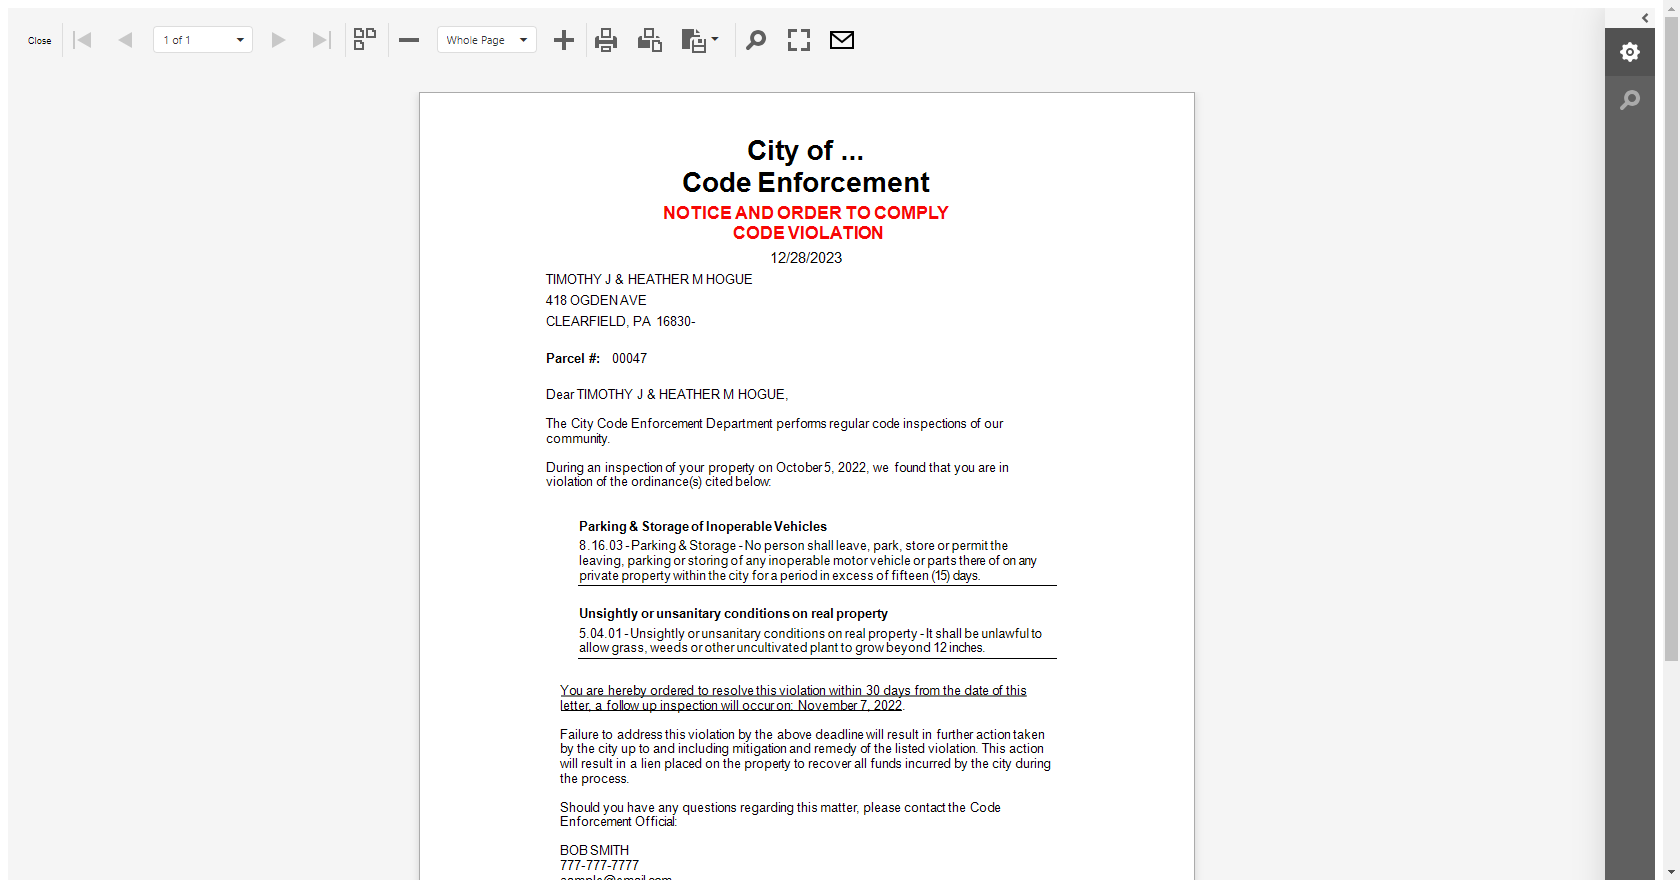 Code Violation Letter with Mail Merge